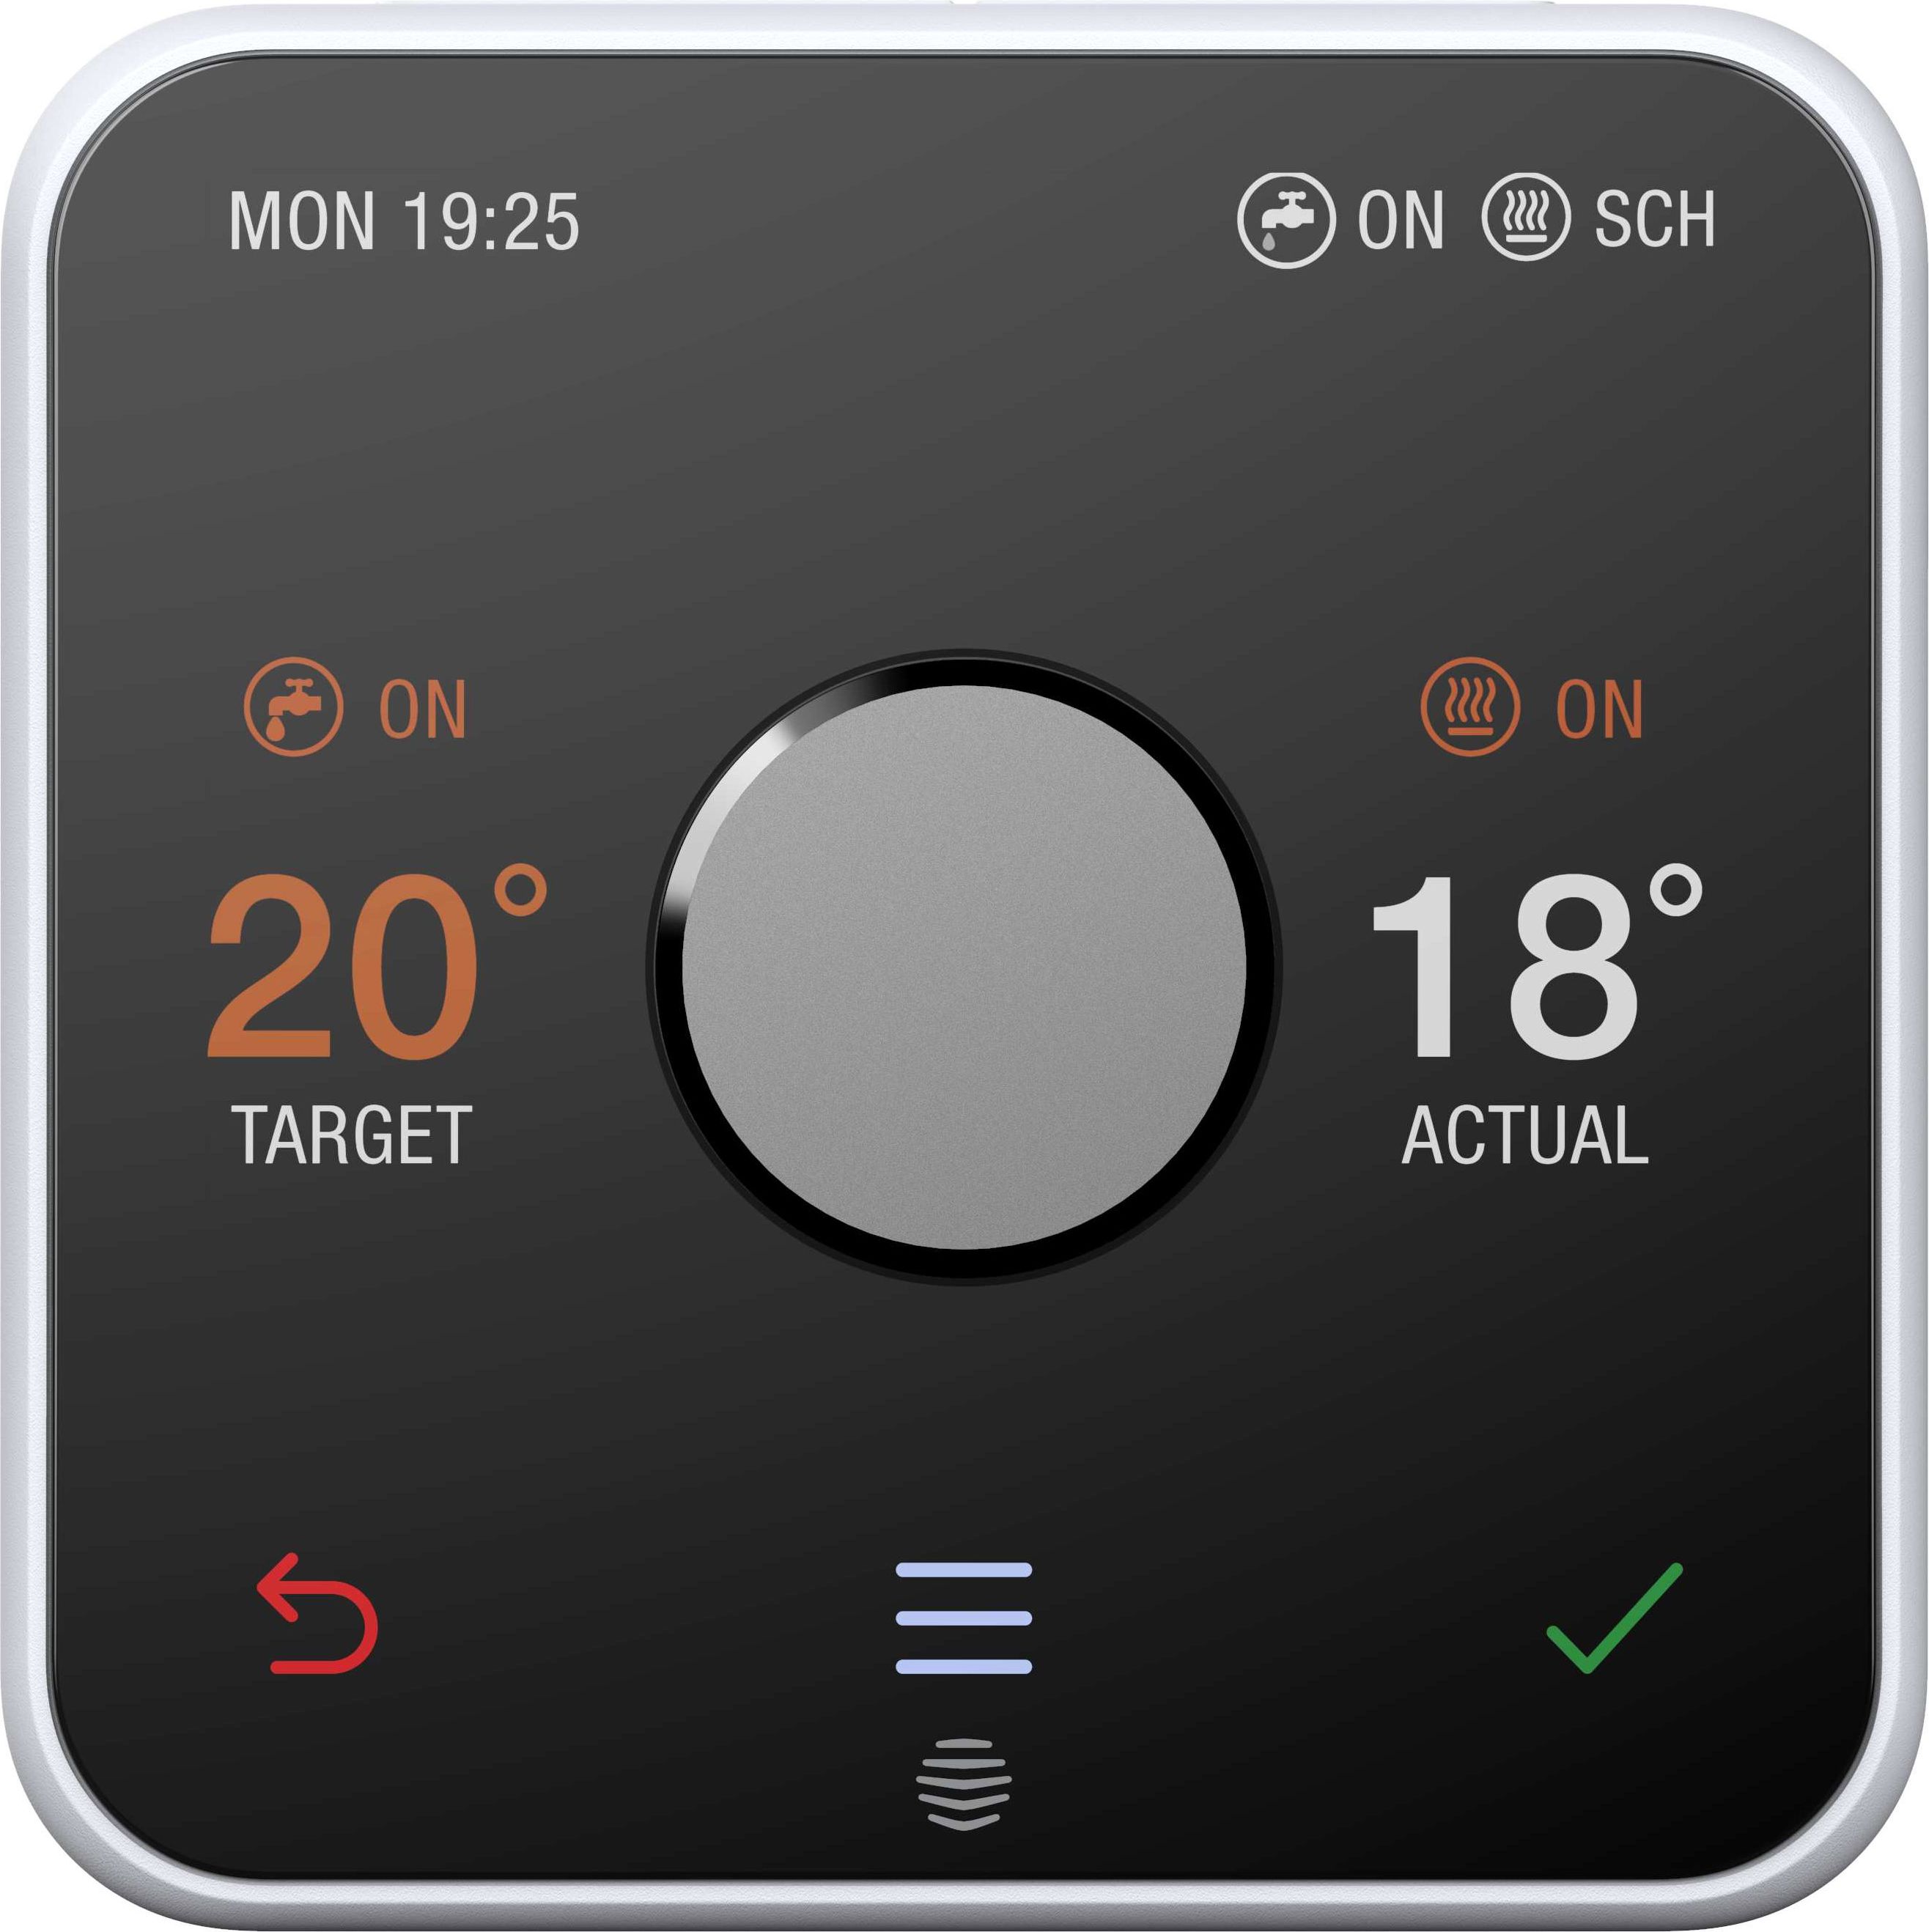 Hive Smart thermostat - Requires professional install - White